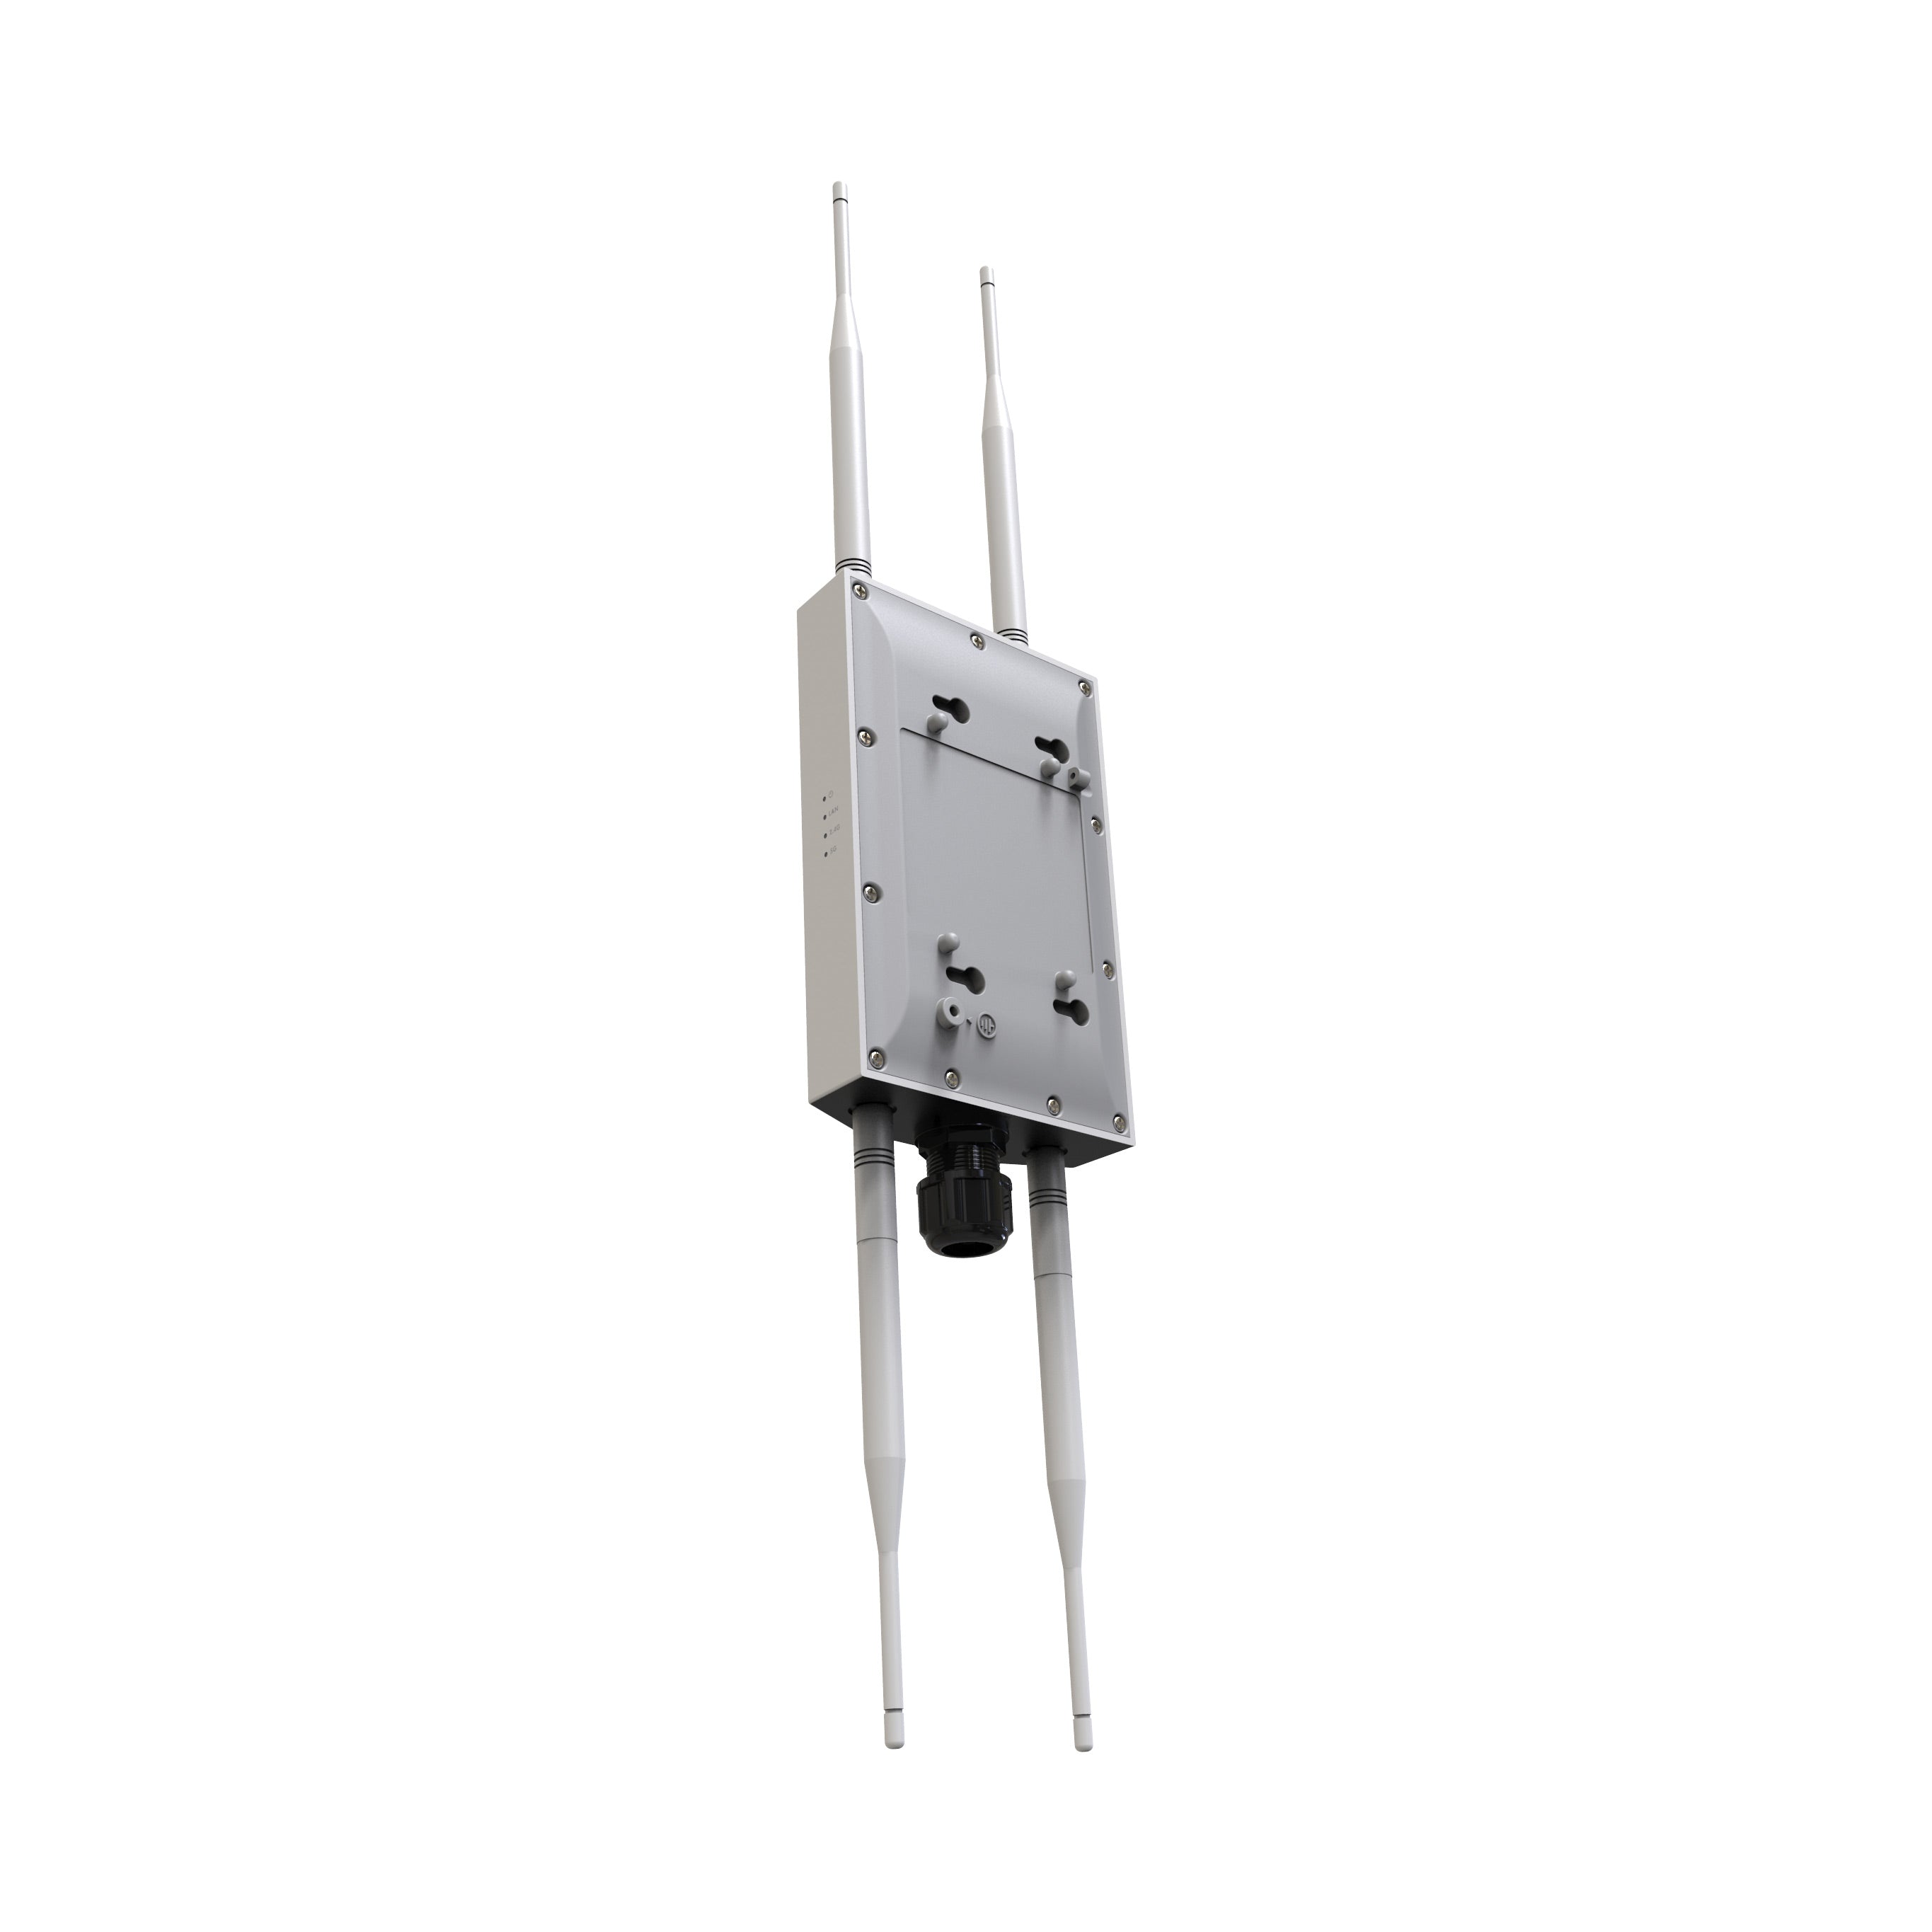 EWS850-FIT: EnGenius Fit Wi-Fi 6 2×2 Outdoor Wireless Access Point